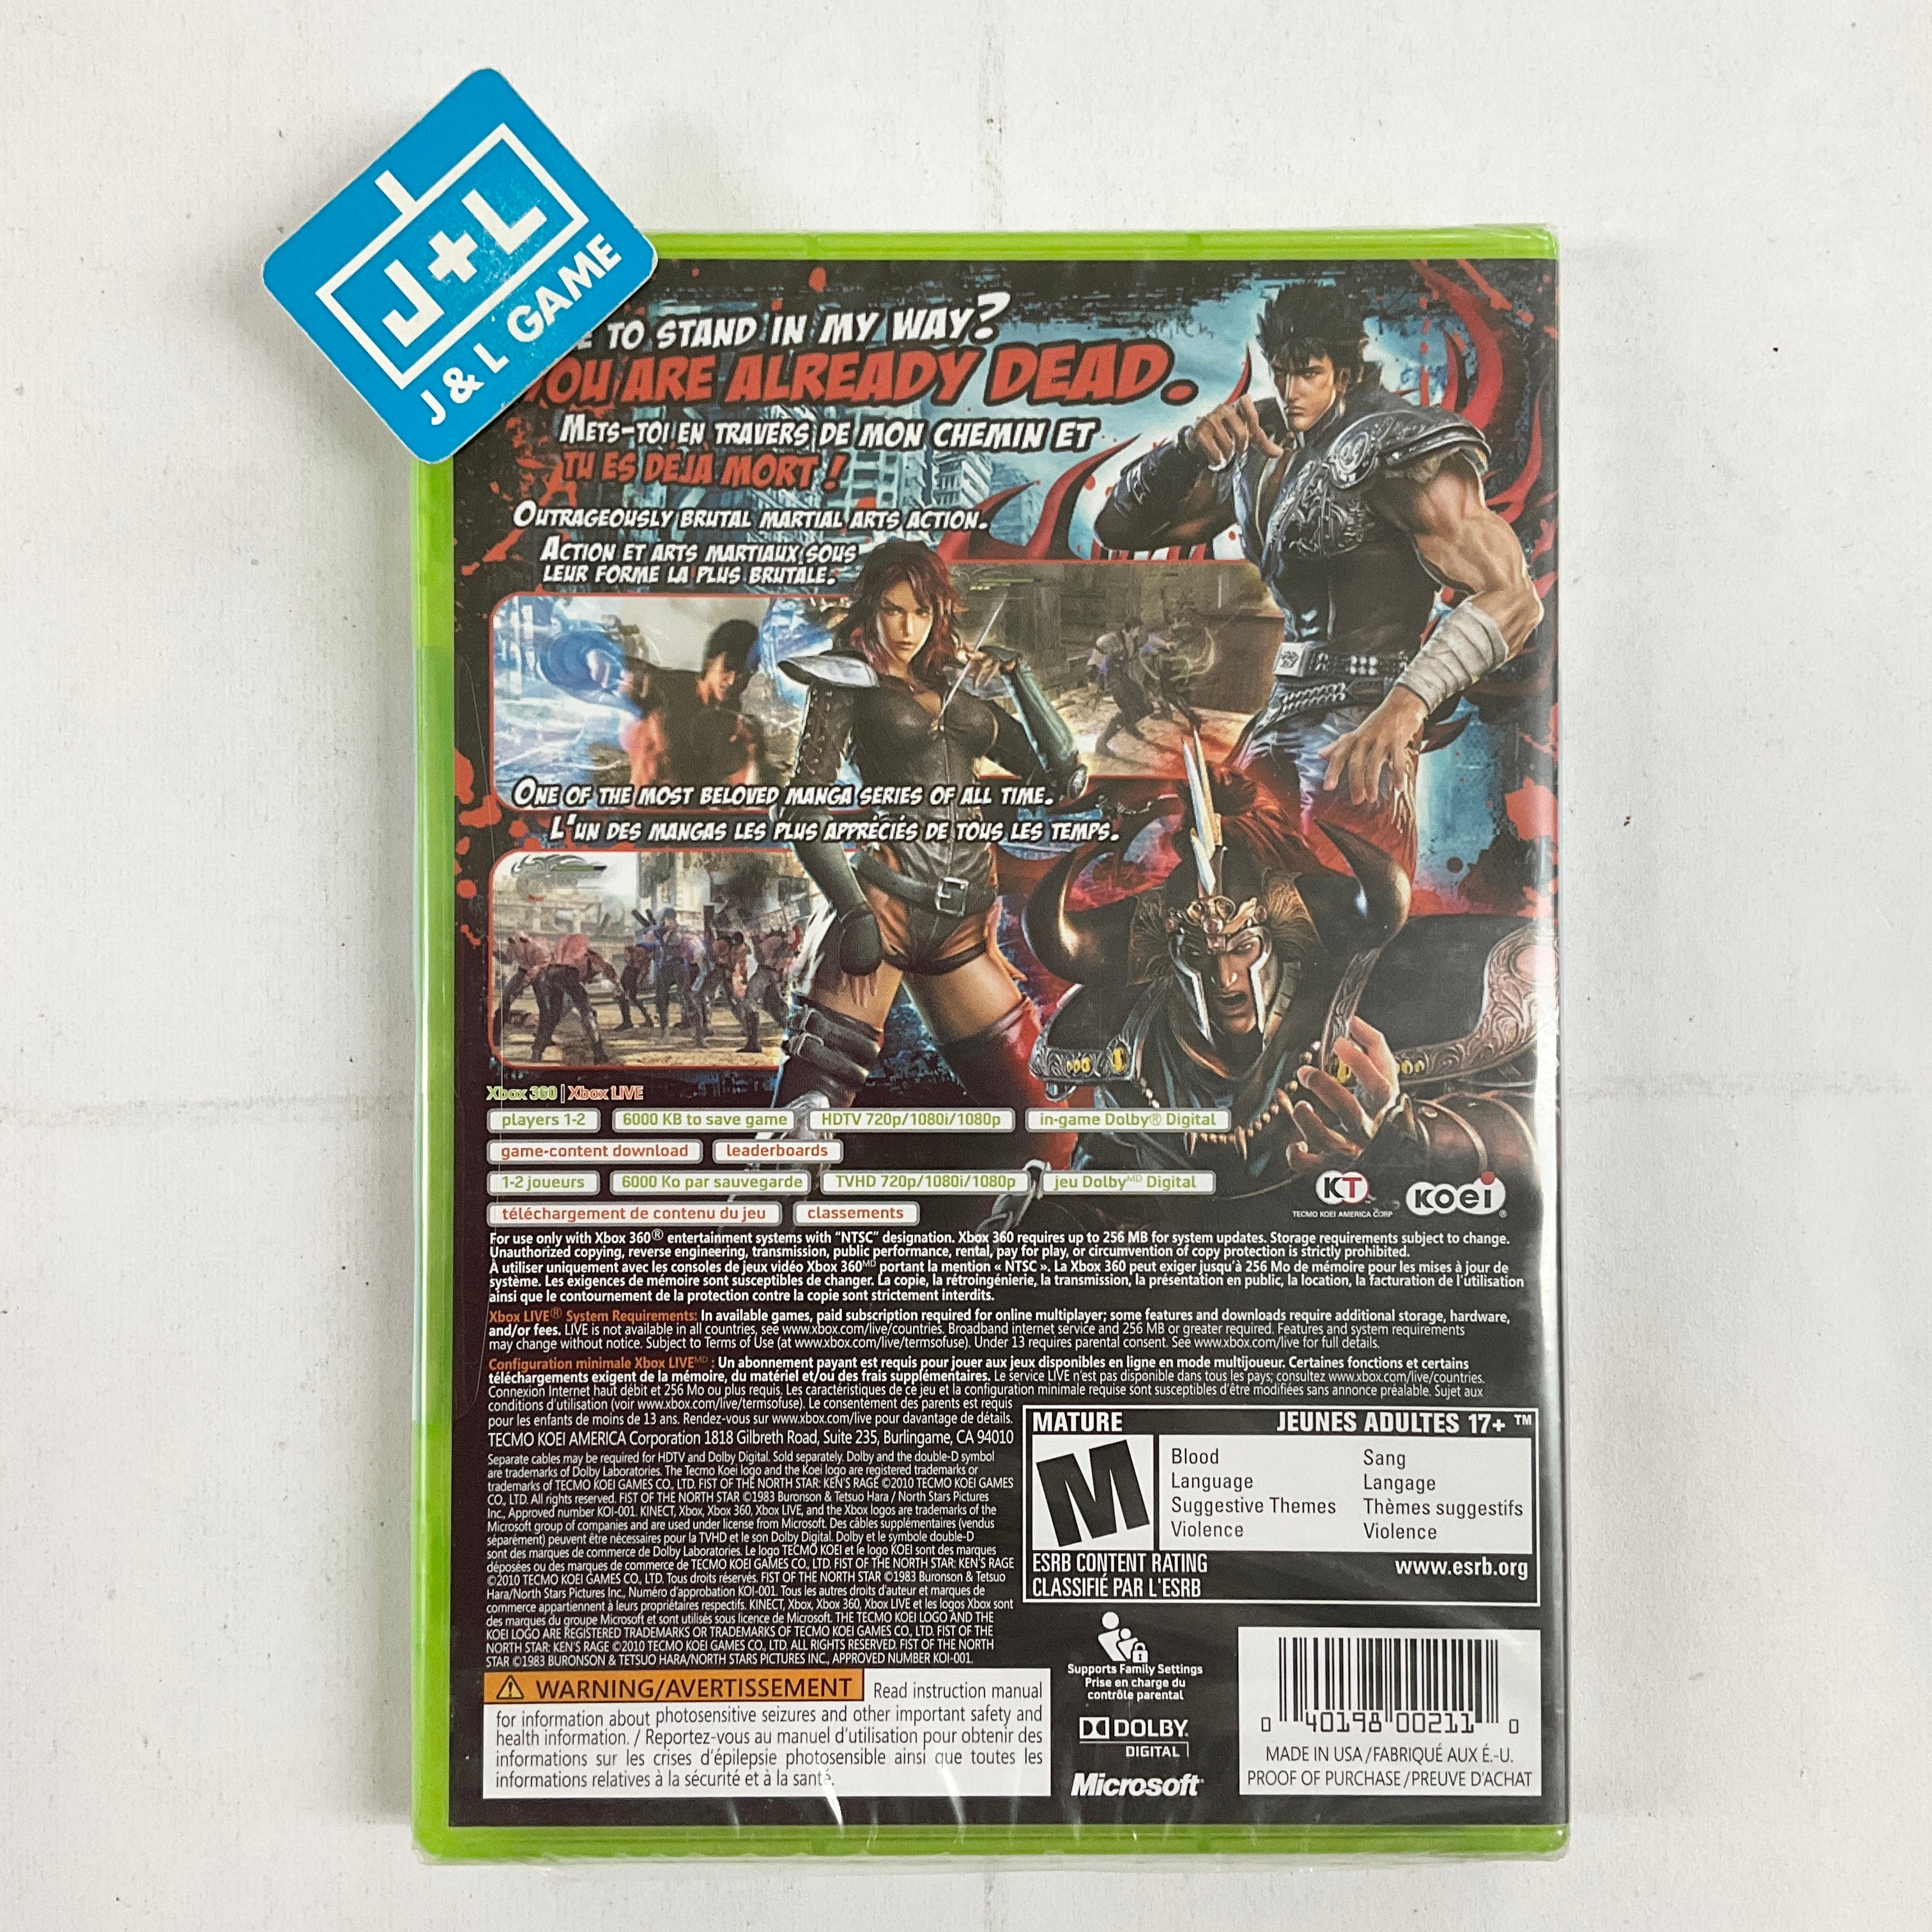 Fist of the North Star: Ken's Rage - Xbox 360 Video Games Koei Tecmo Games   